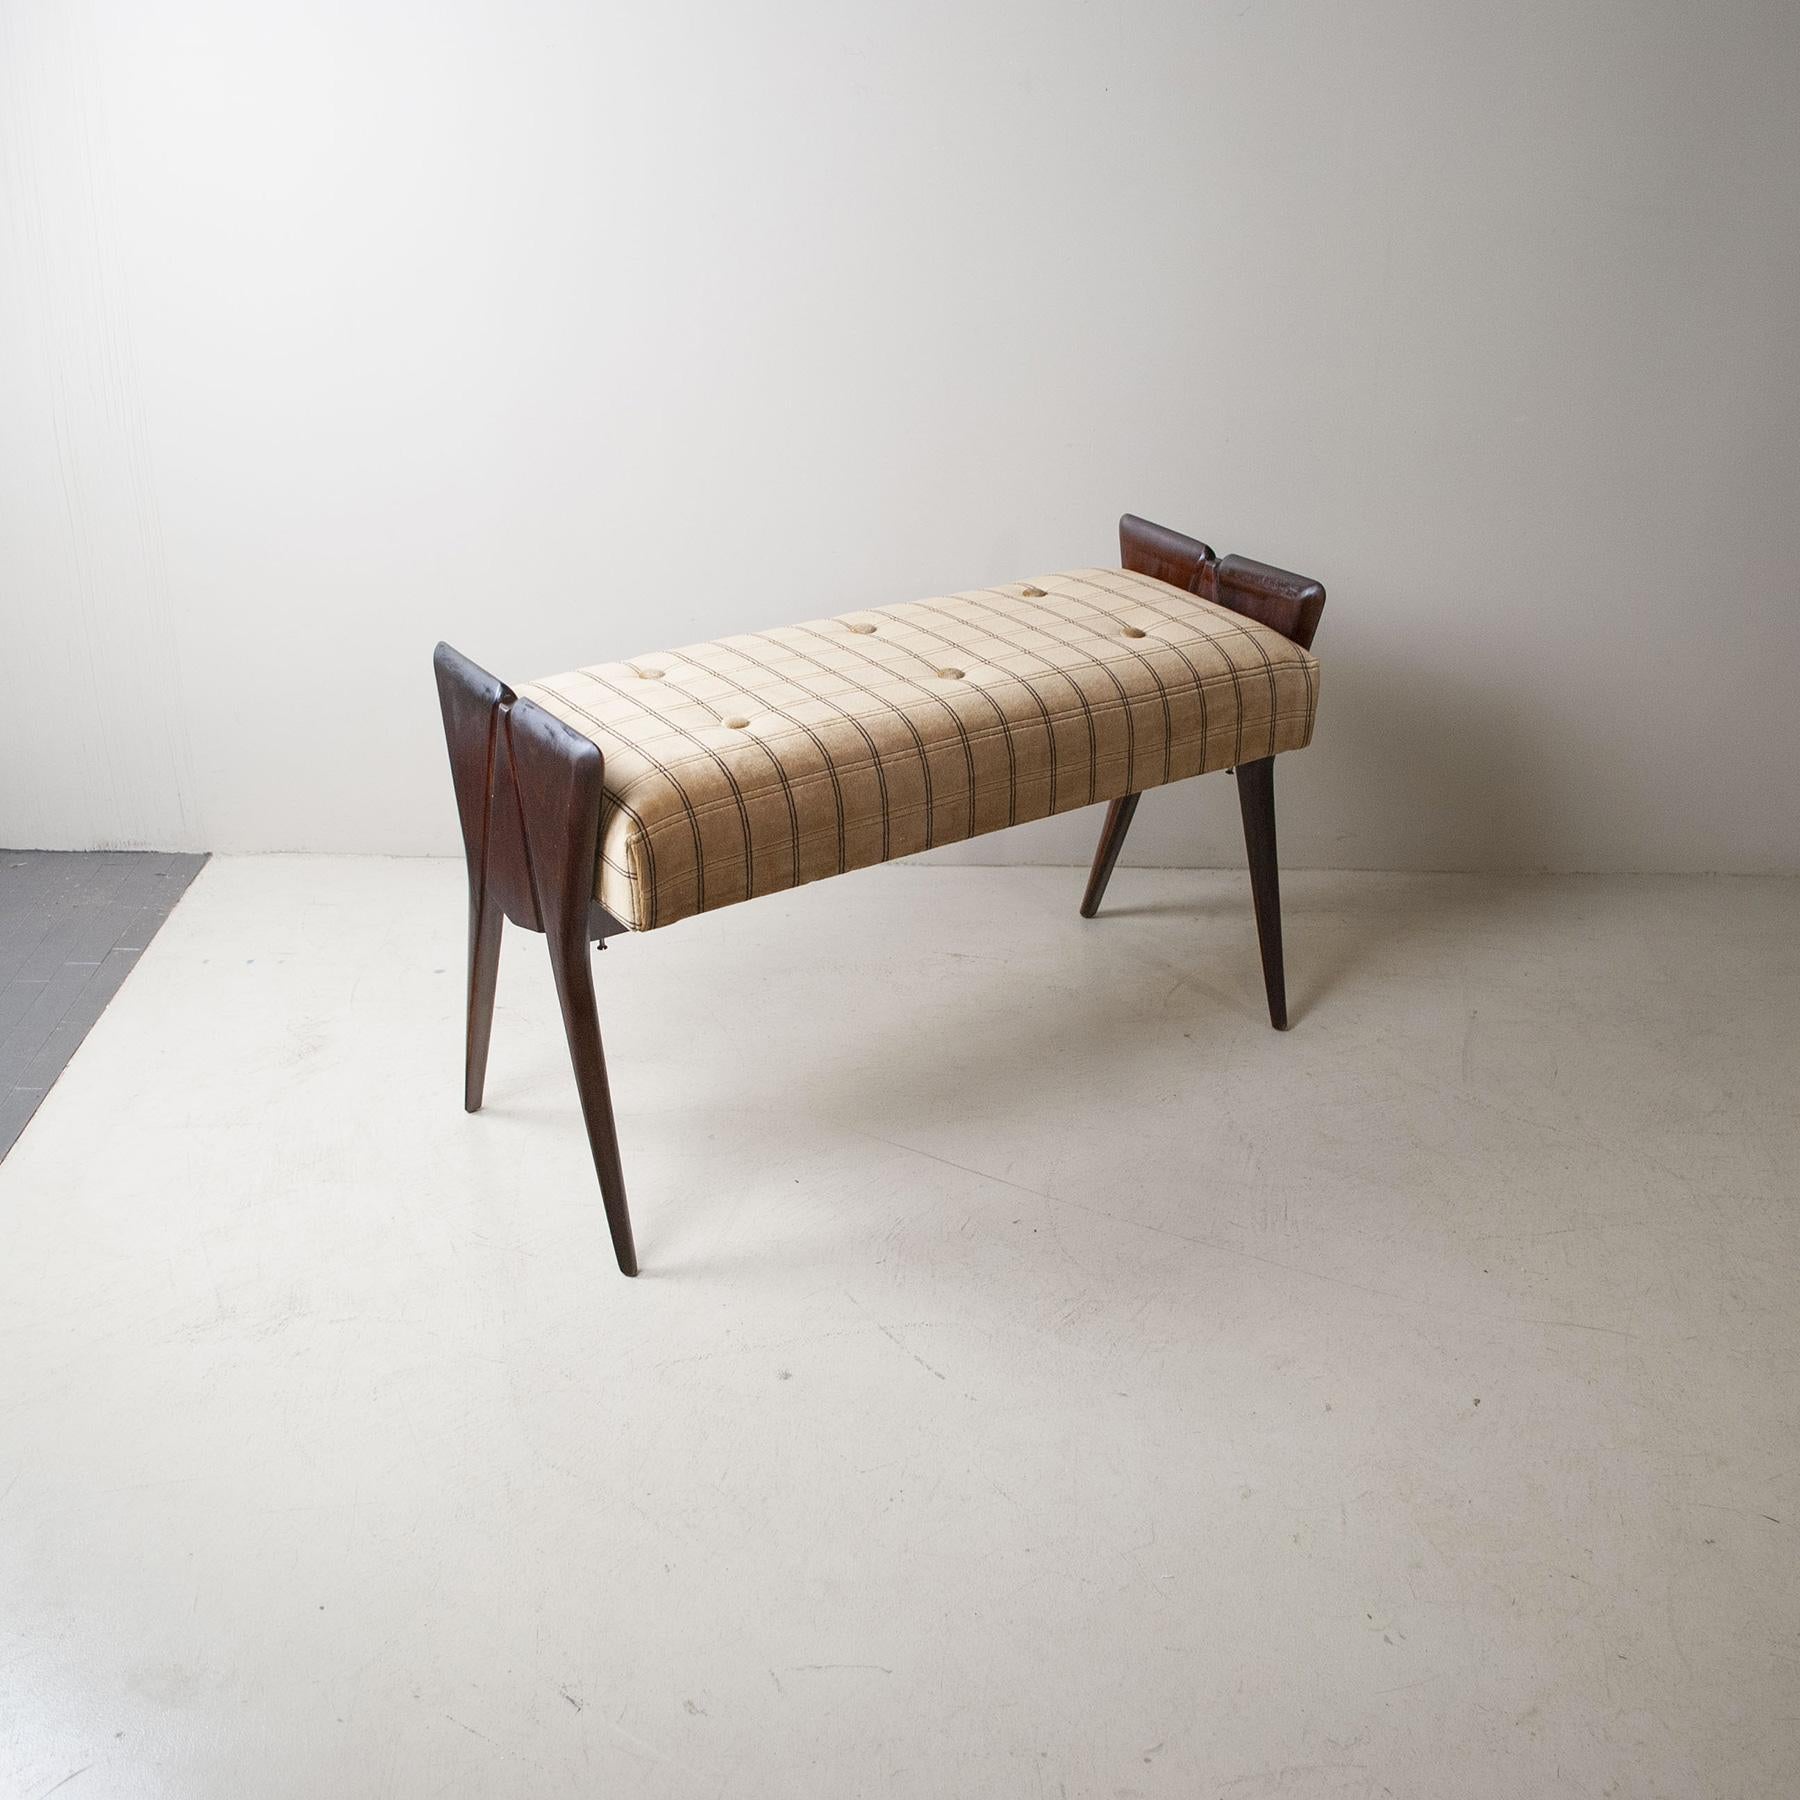 Mid-20th Century Ico Parisi Italian Midcentury Bench from the Fifties For Sale